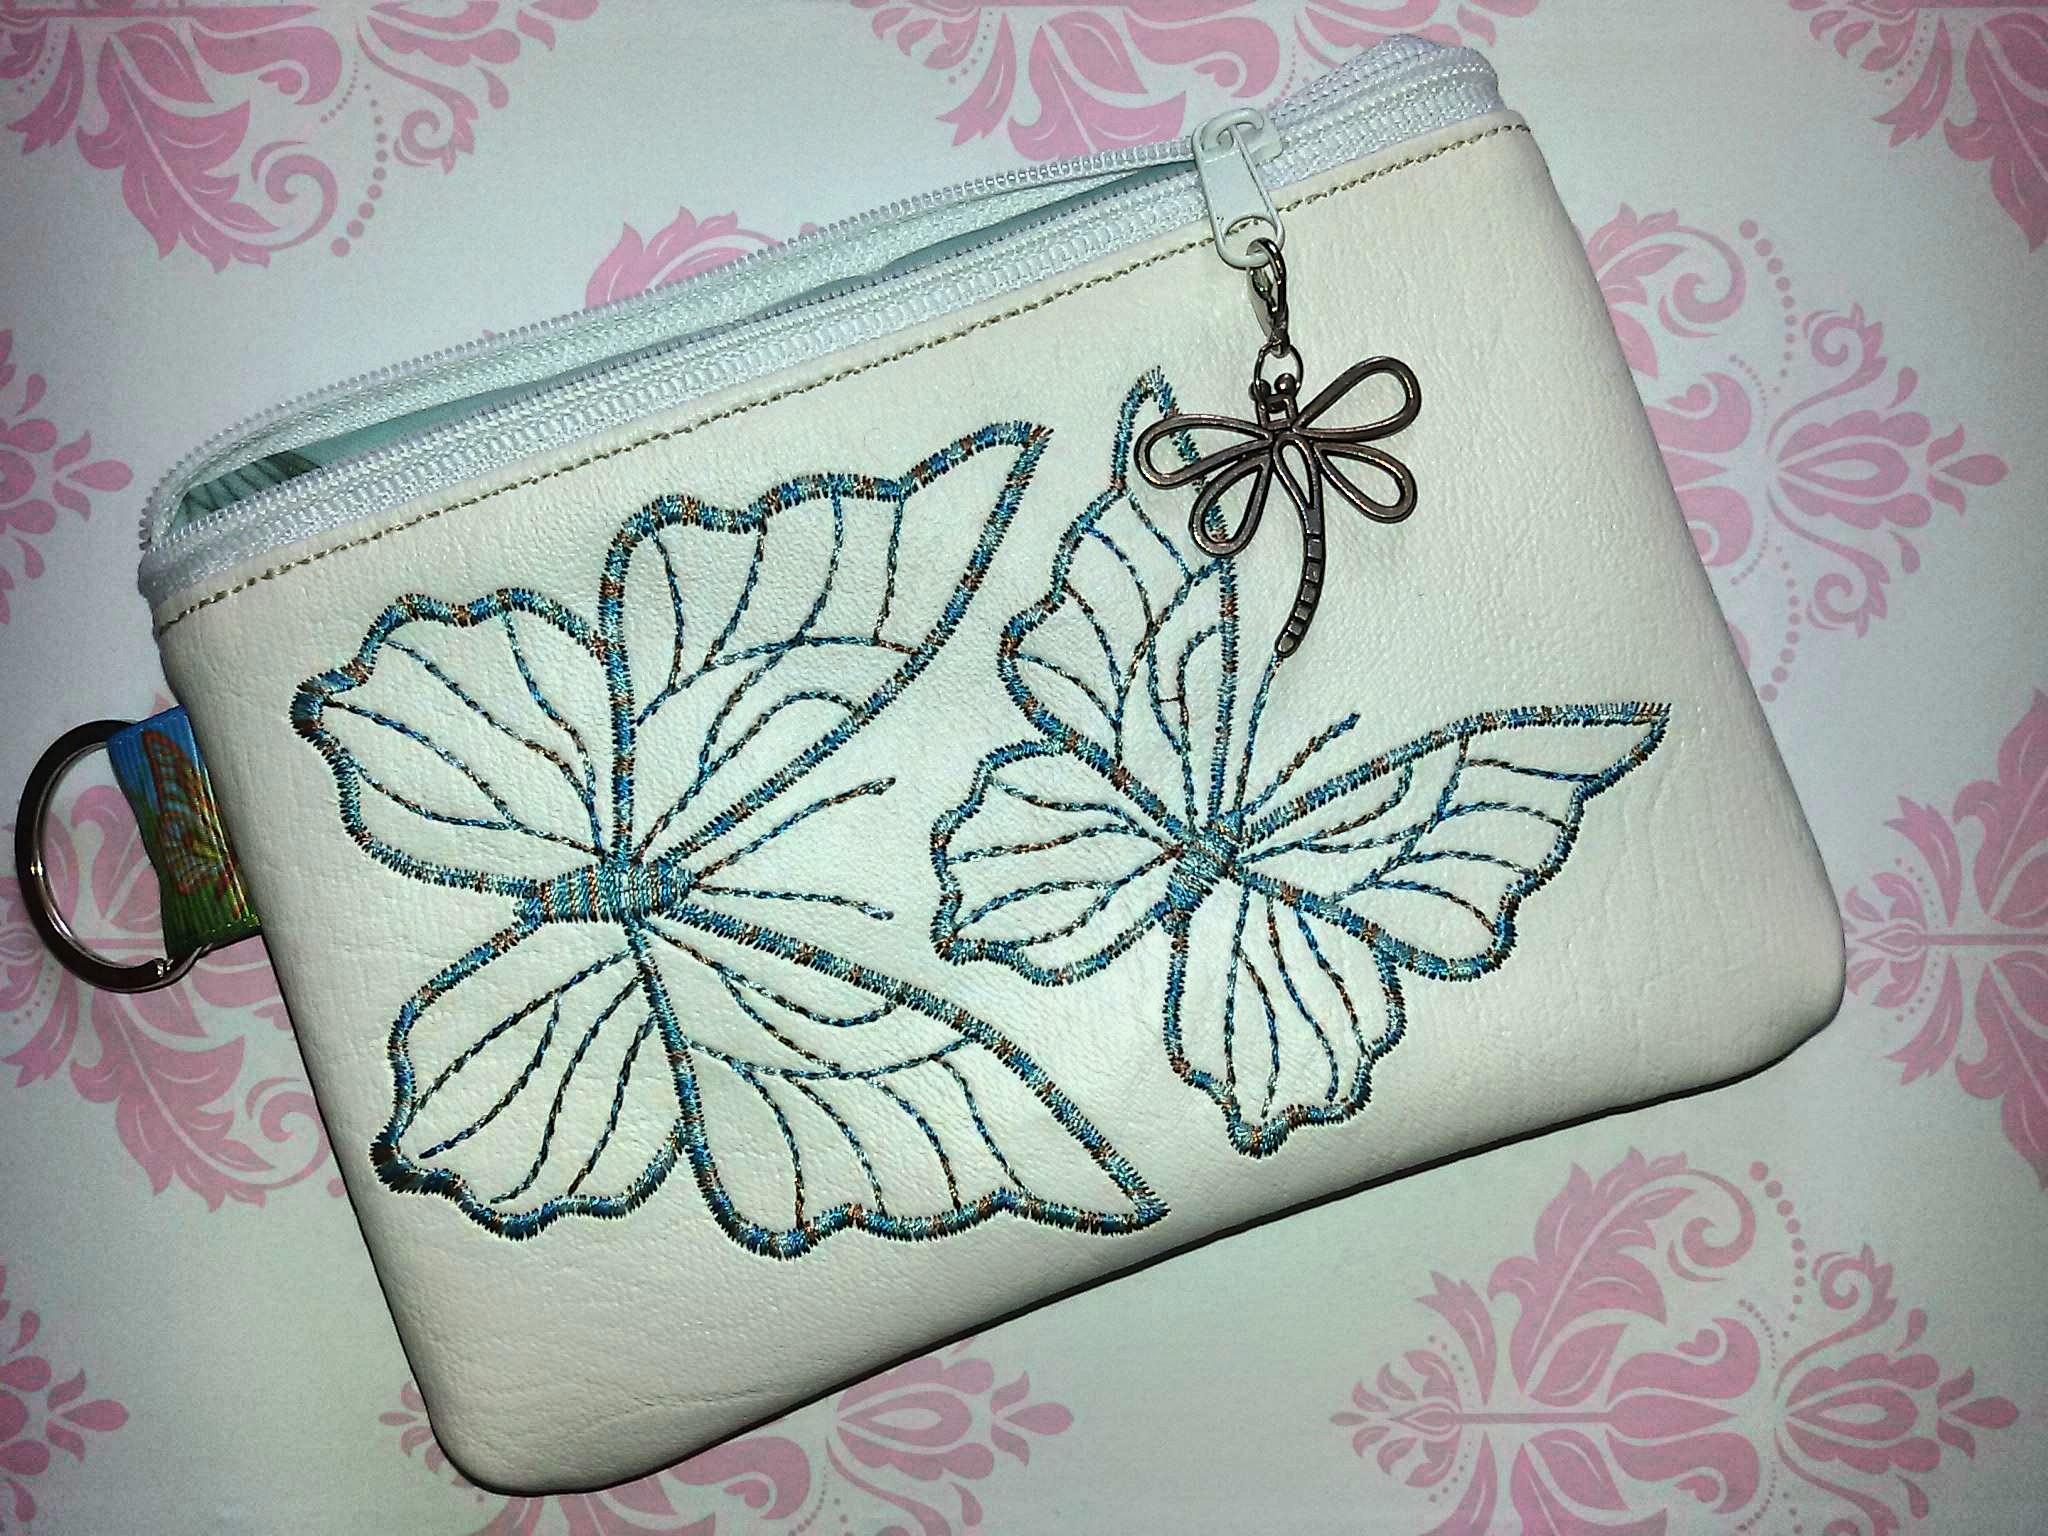 Handbag with Blue butterfies embroidery design